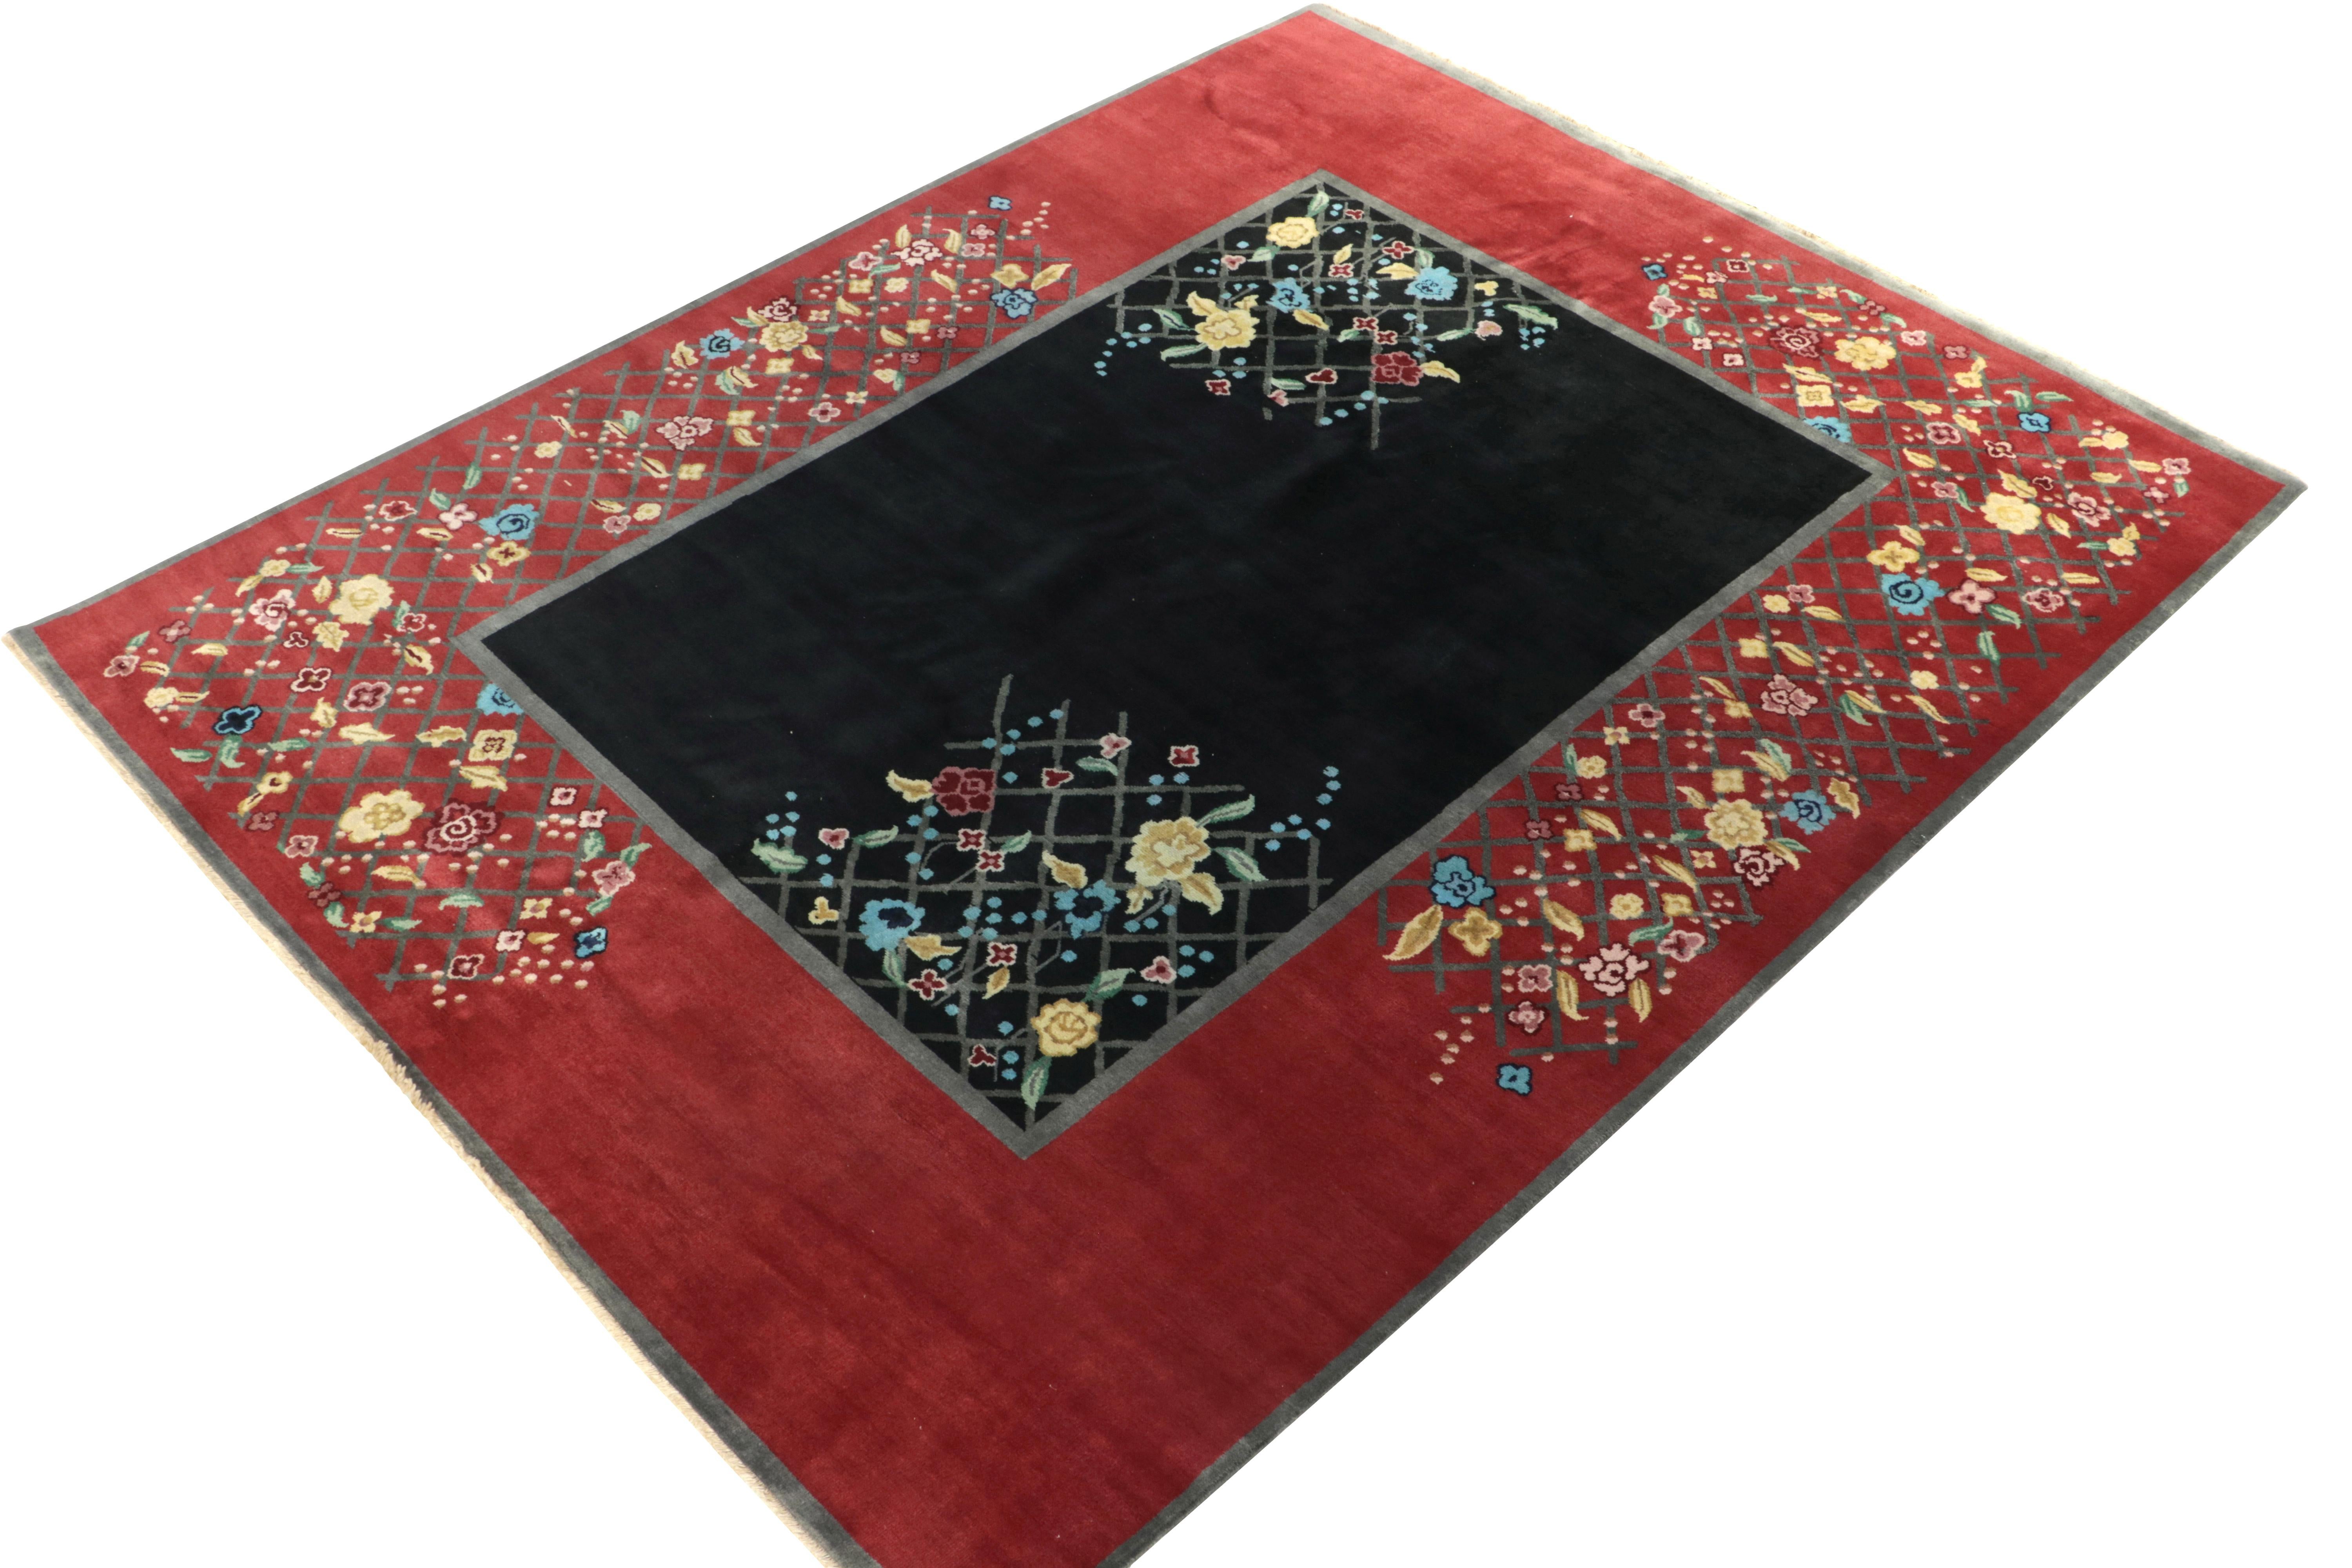 hand knotted in luscious wool, an 8x10 Art Deco rug, inspired by Chinese sensibilities of the 1920s. 

On the Design: A deep red border marries a bold black field, both enjoying the sheen of this fabulous blend of yarns for a lustrous, healthy